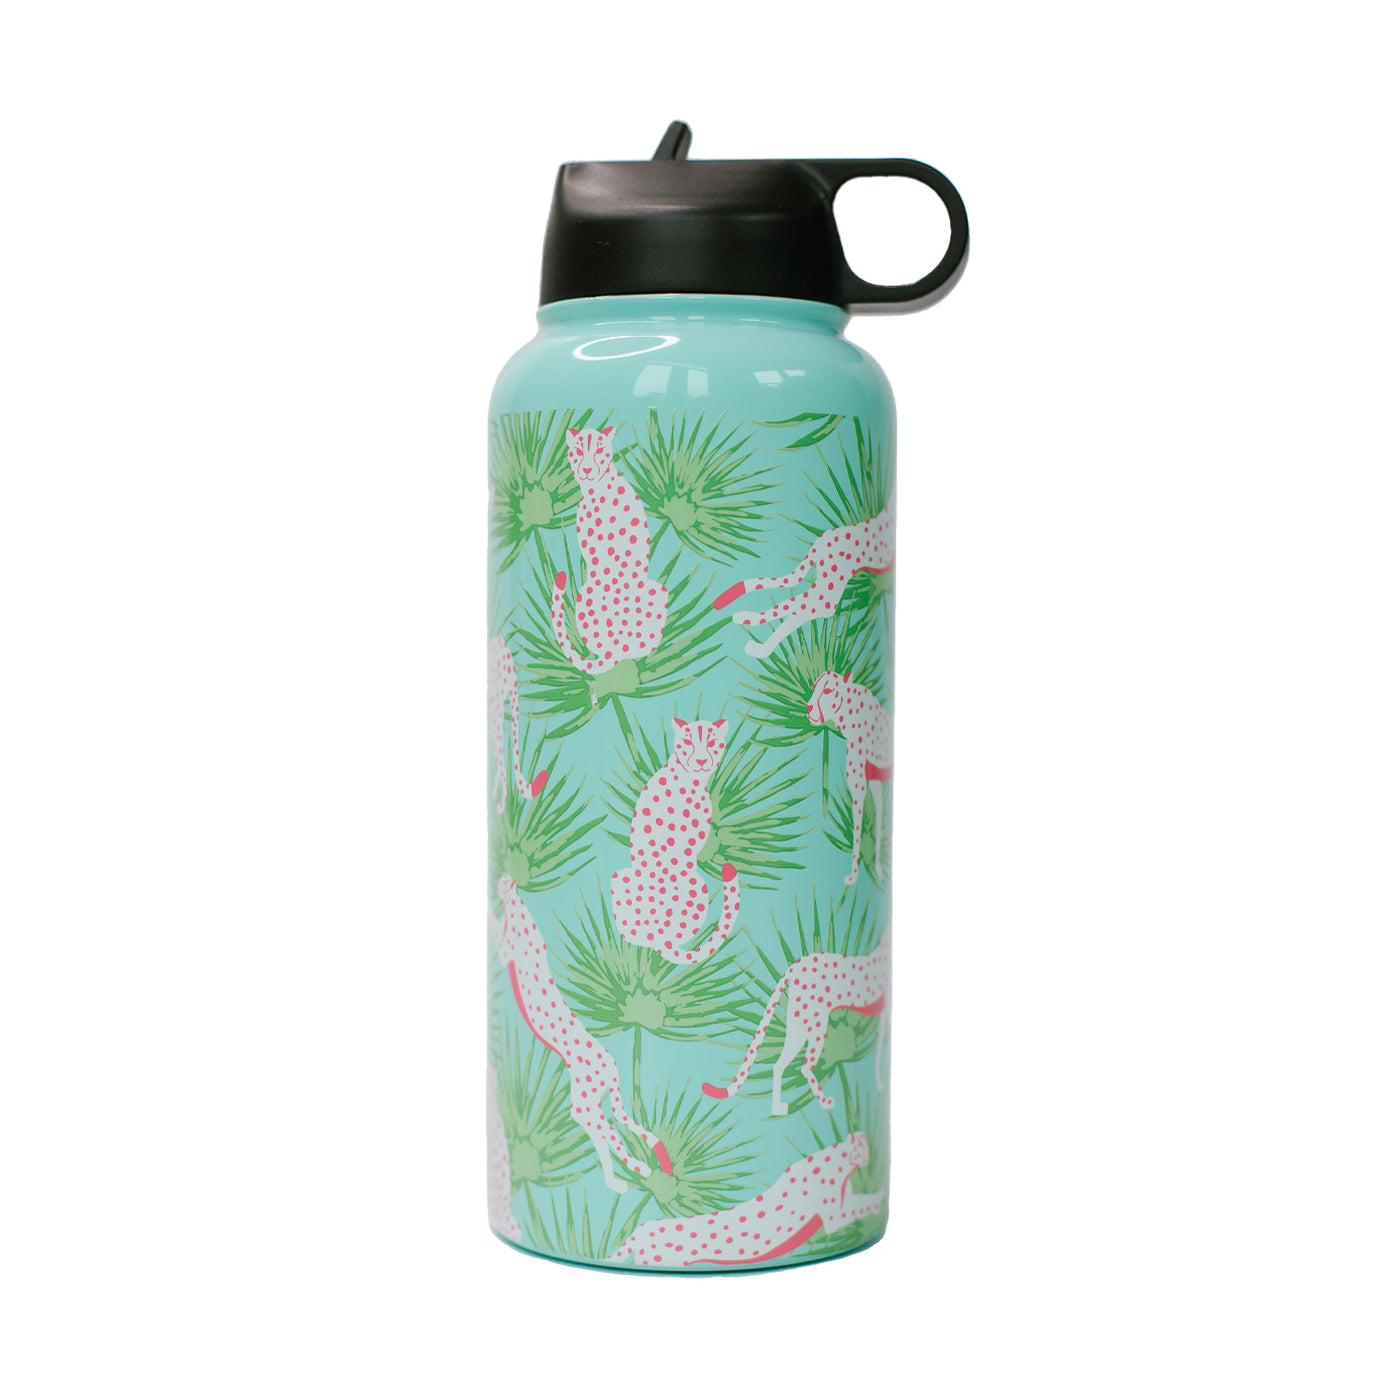 Party Animal | Stainless Large Bottle - Mary Square, LLC